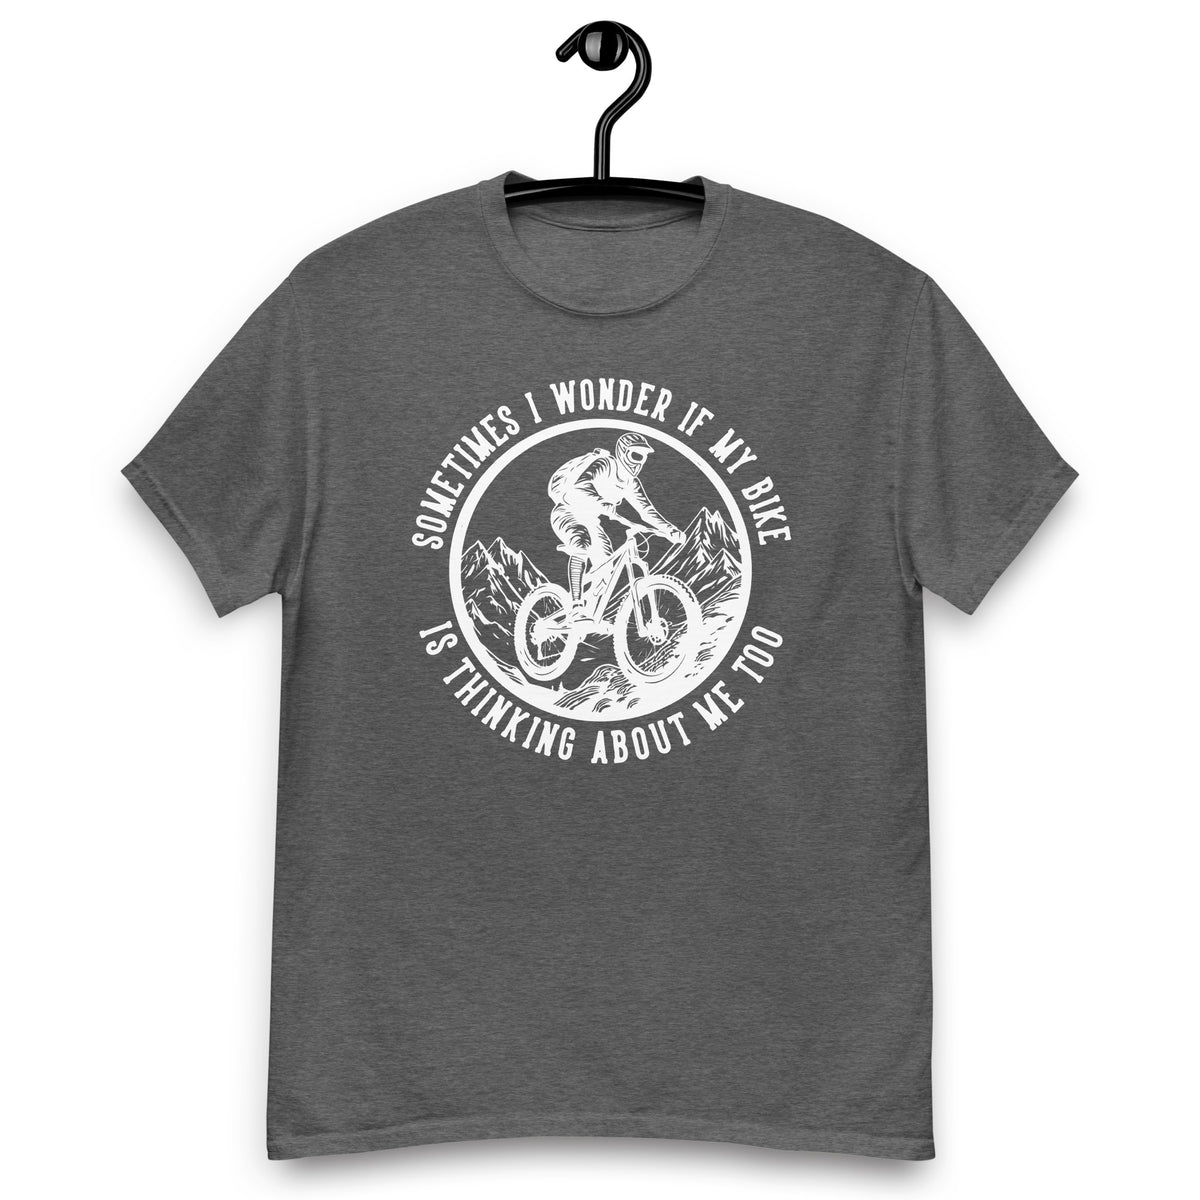 Fahrrad Shirts "Sometimes I Wonder If My Bike Is Thinking About Me Too" Variane 6